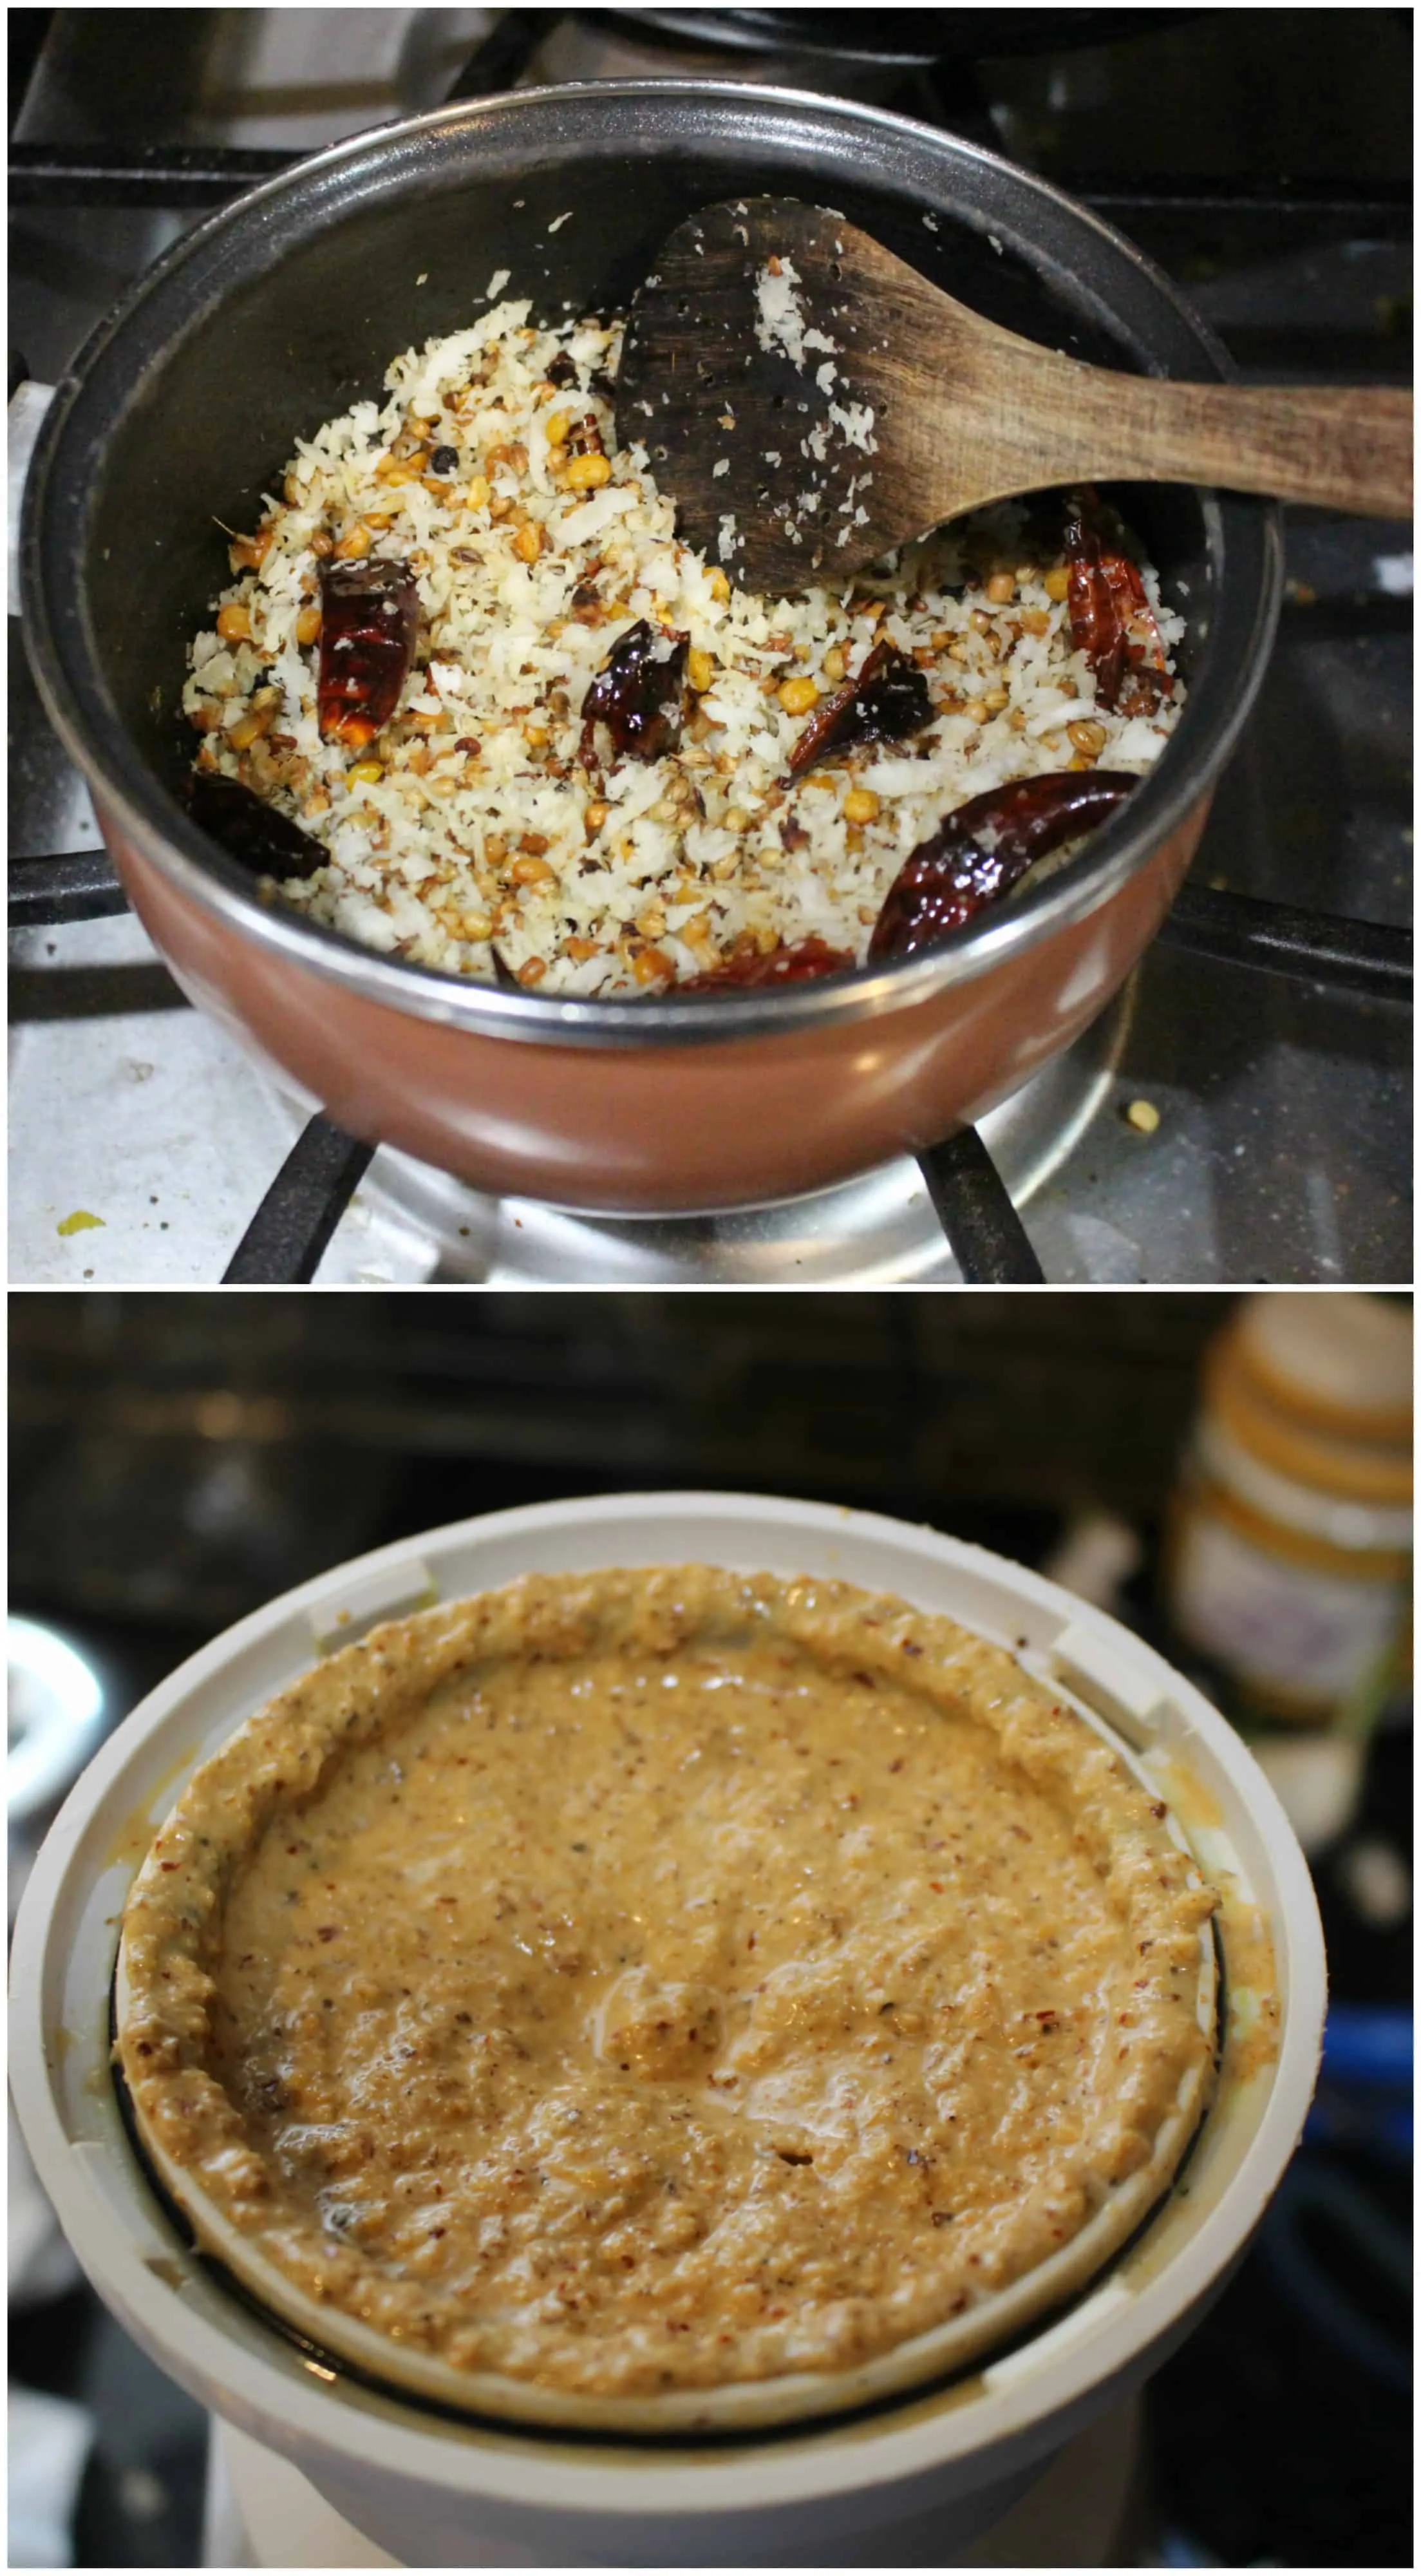 Cooking mixture in a pot and blend it into a paste.